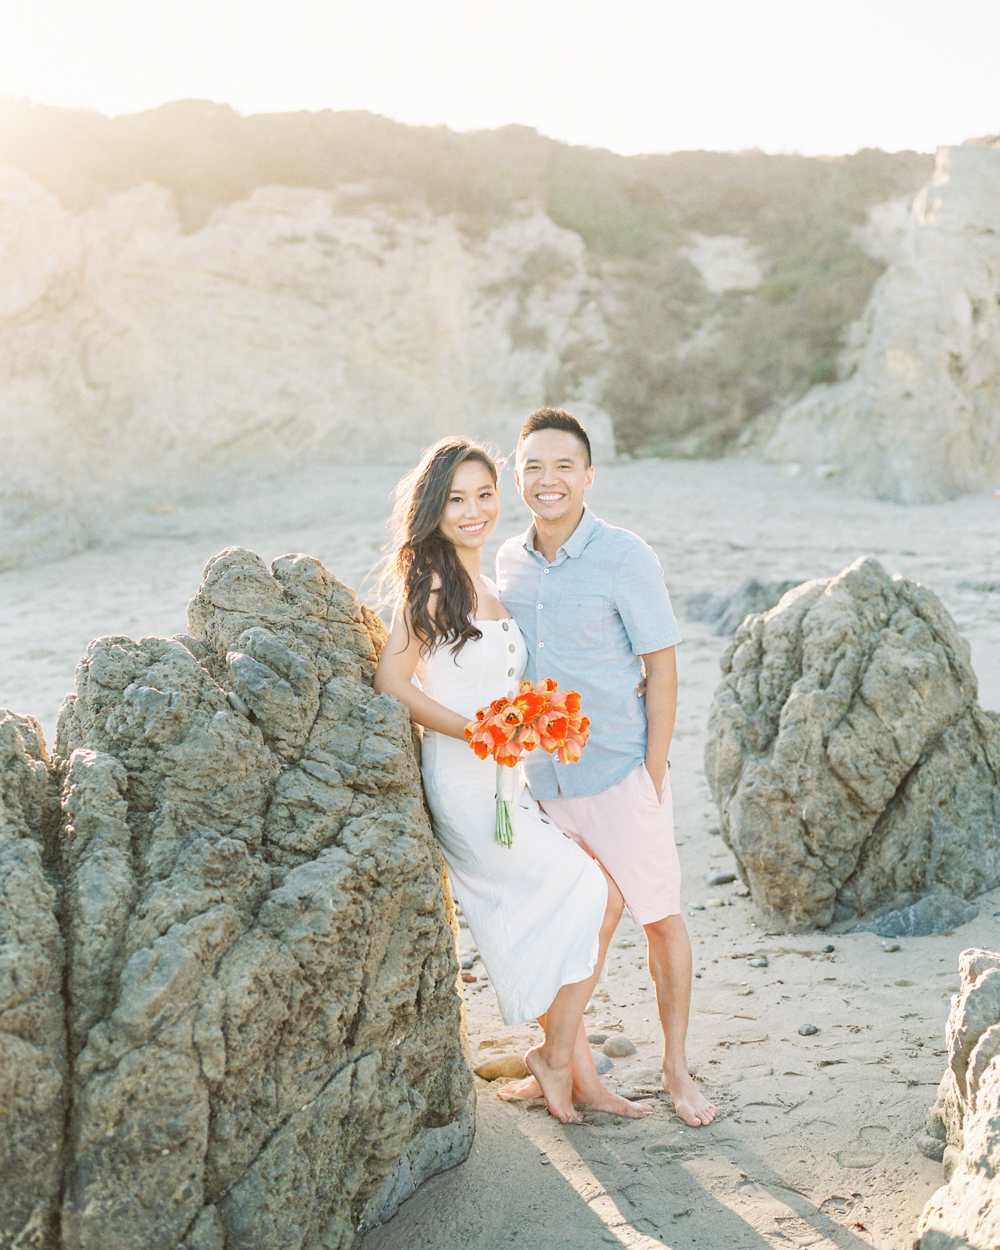 Light and airy beach engagement shoot